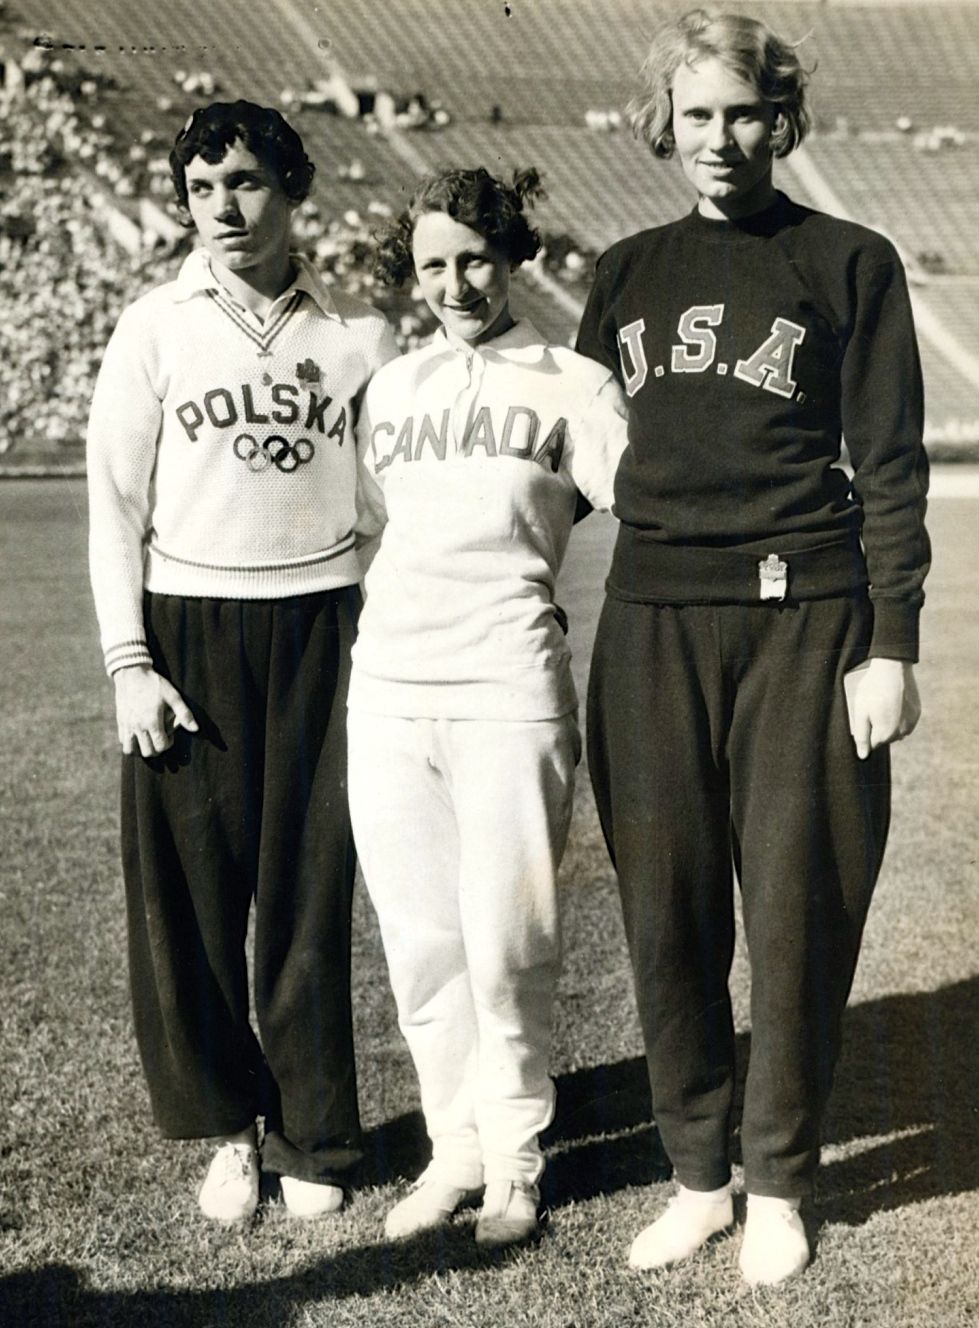 The Sweatpant - Olympic Games - 1936